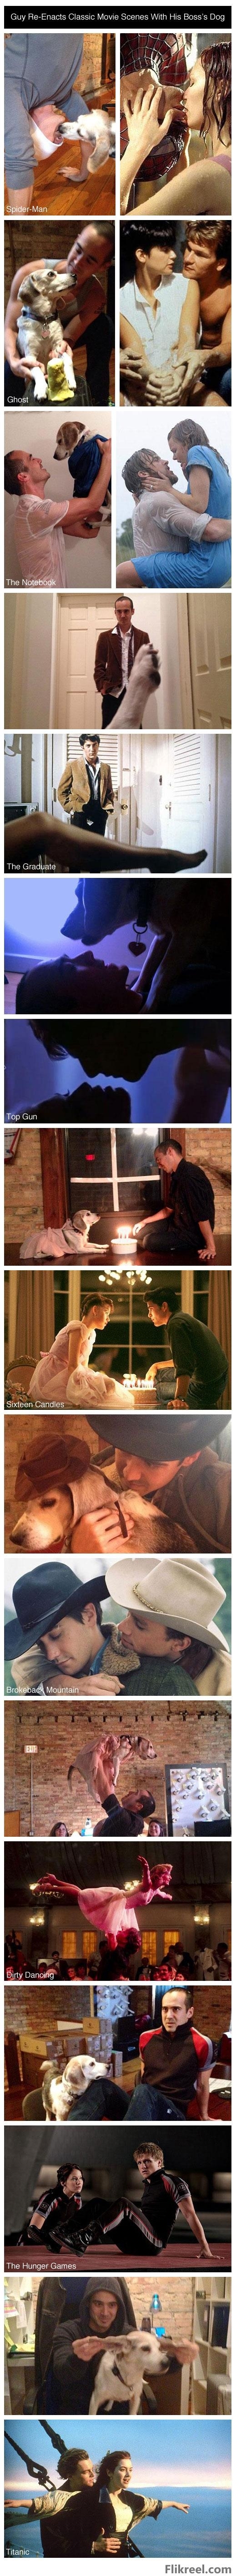 Guy re-enacts classic movies scenes with his Bosss dog